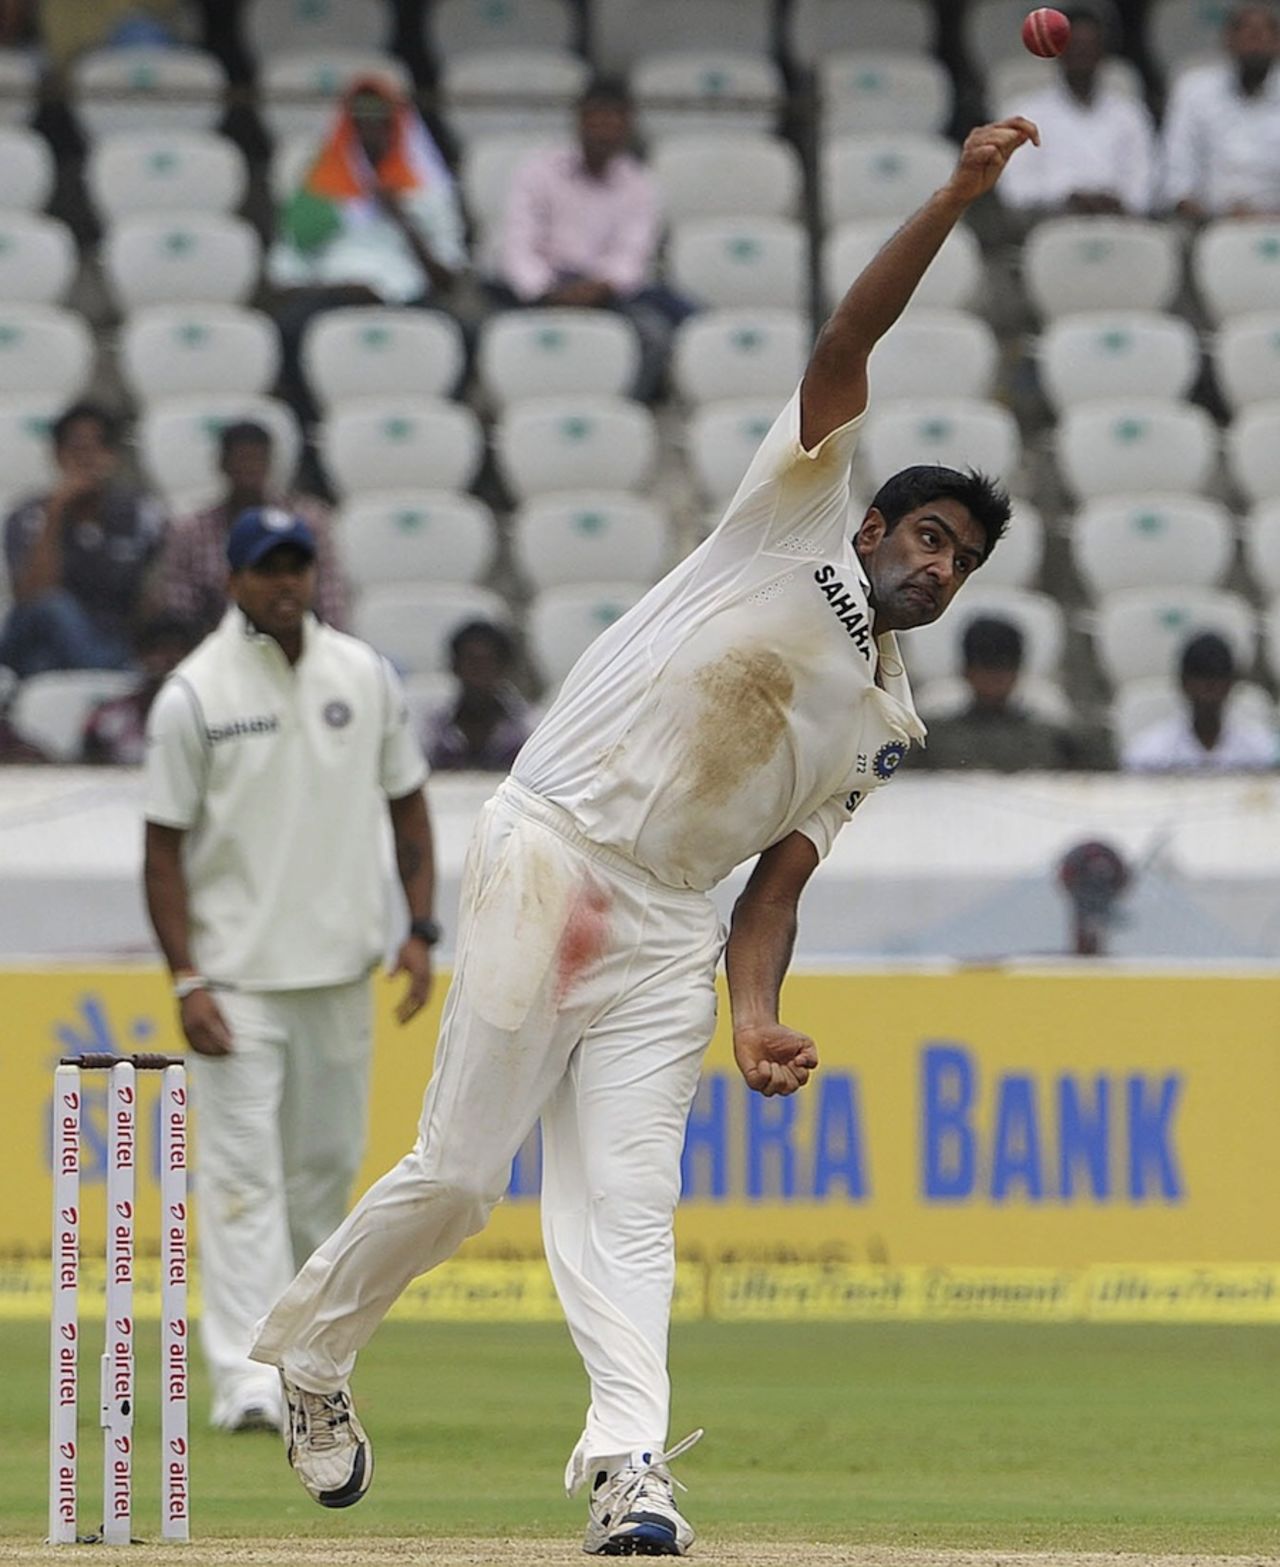 R Ashwin bowls during the second innings, India v New Zealand, 1st Test, Hyderabad, 4th day, August 26, 2012